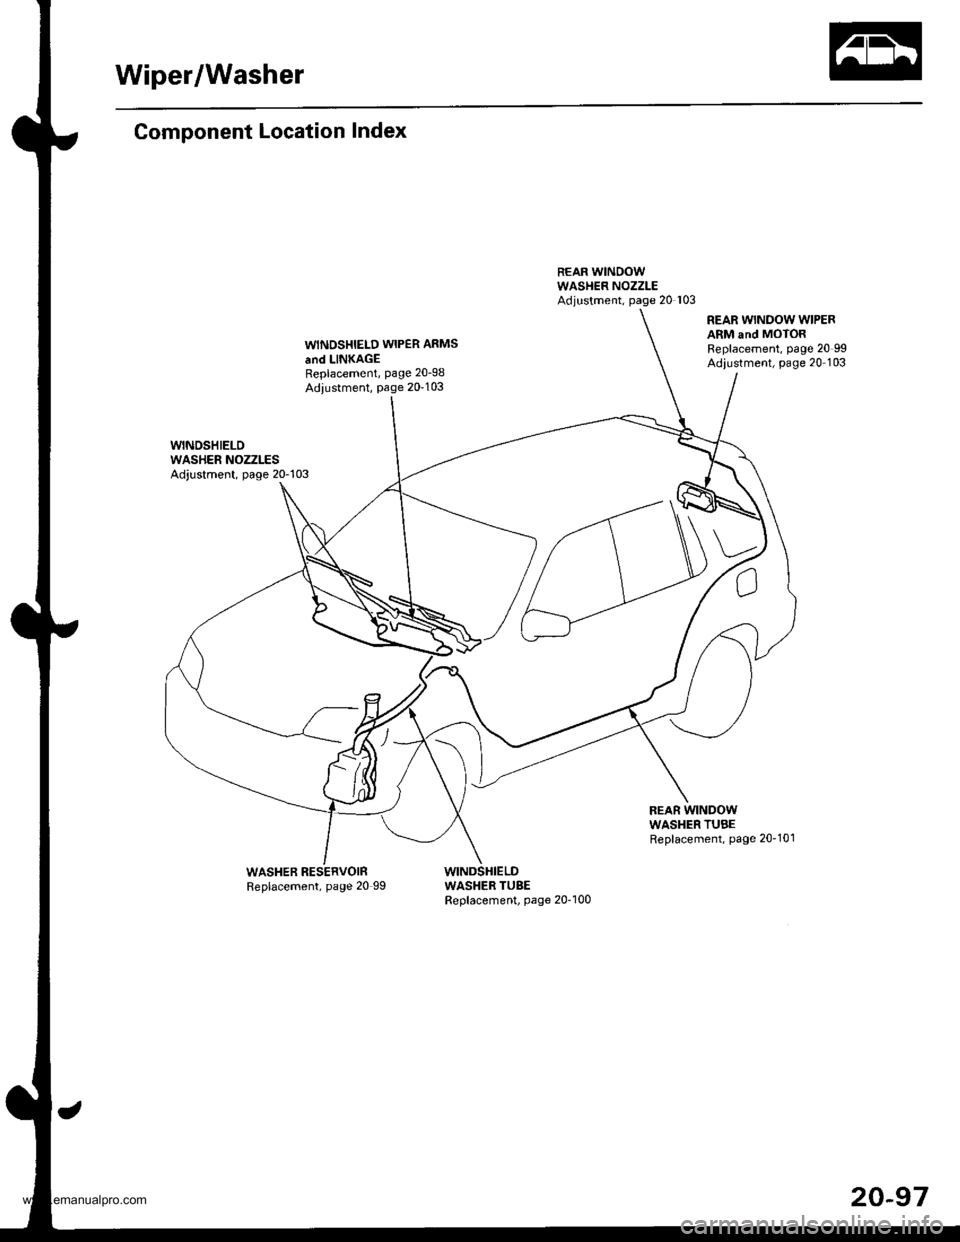 HONDA CR-V 1999 RD1-RD3 / 1.G Workshop Manual 
Wiper/Washer
Component Location Index
WINOSHIELD WIPER ARMS
and LINKAGEReplacement, page 20-98
Adiustment, Page 20-103
REAR WINDOW WIPERARM and MOTORReplacement, page 20 99Adiustment, page 20 103
WAS